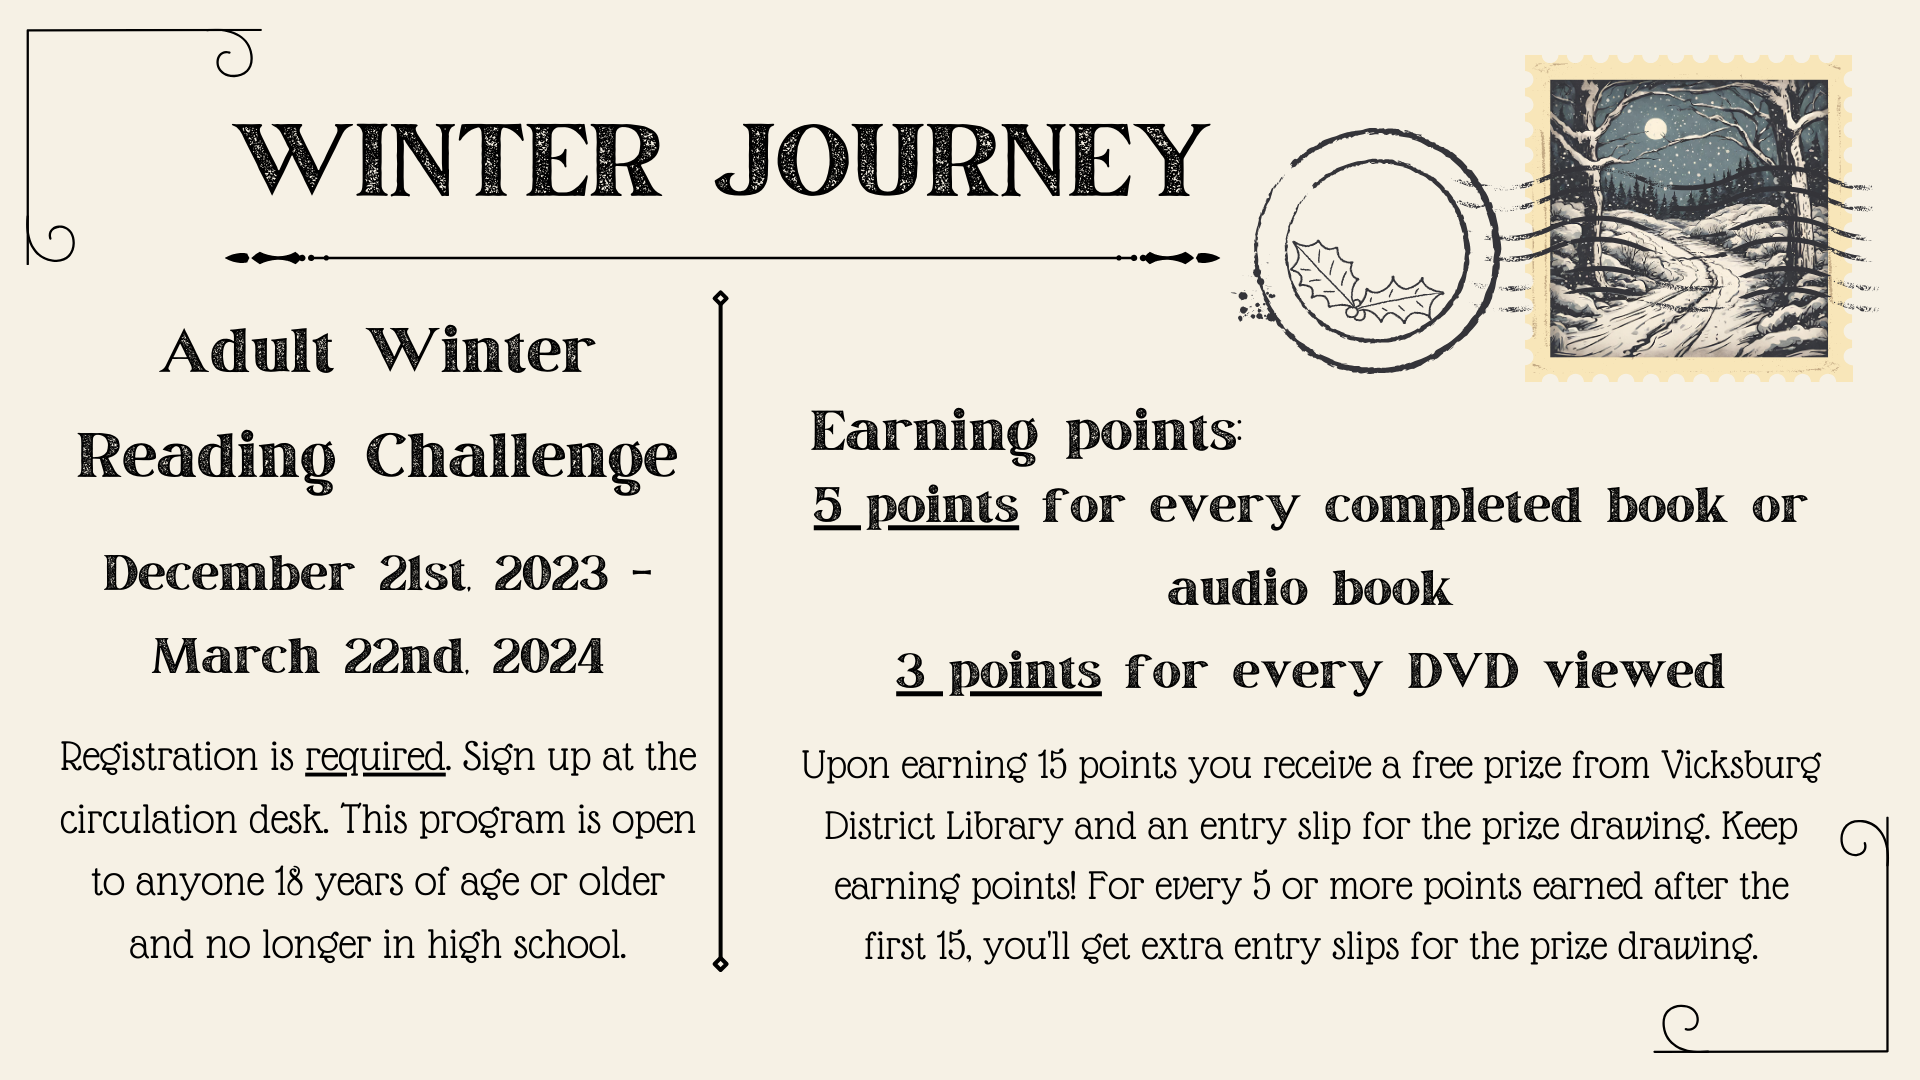 VDL's adult winter reading challenge runs from Dec. 21 - Mar. 22. Sign up at circ desk.